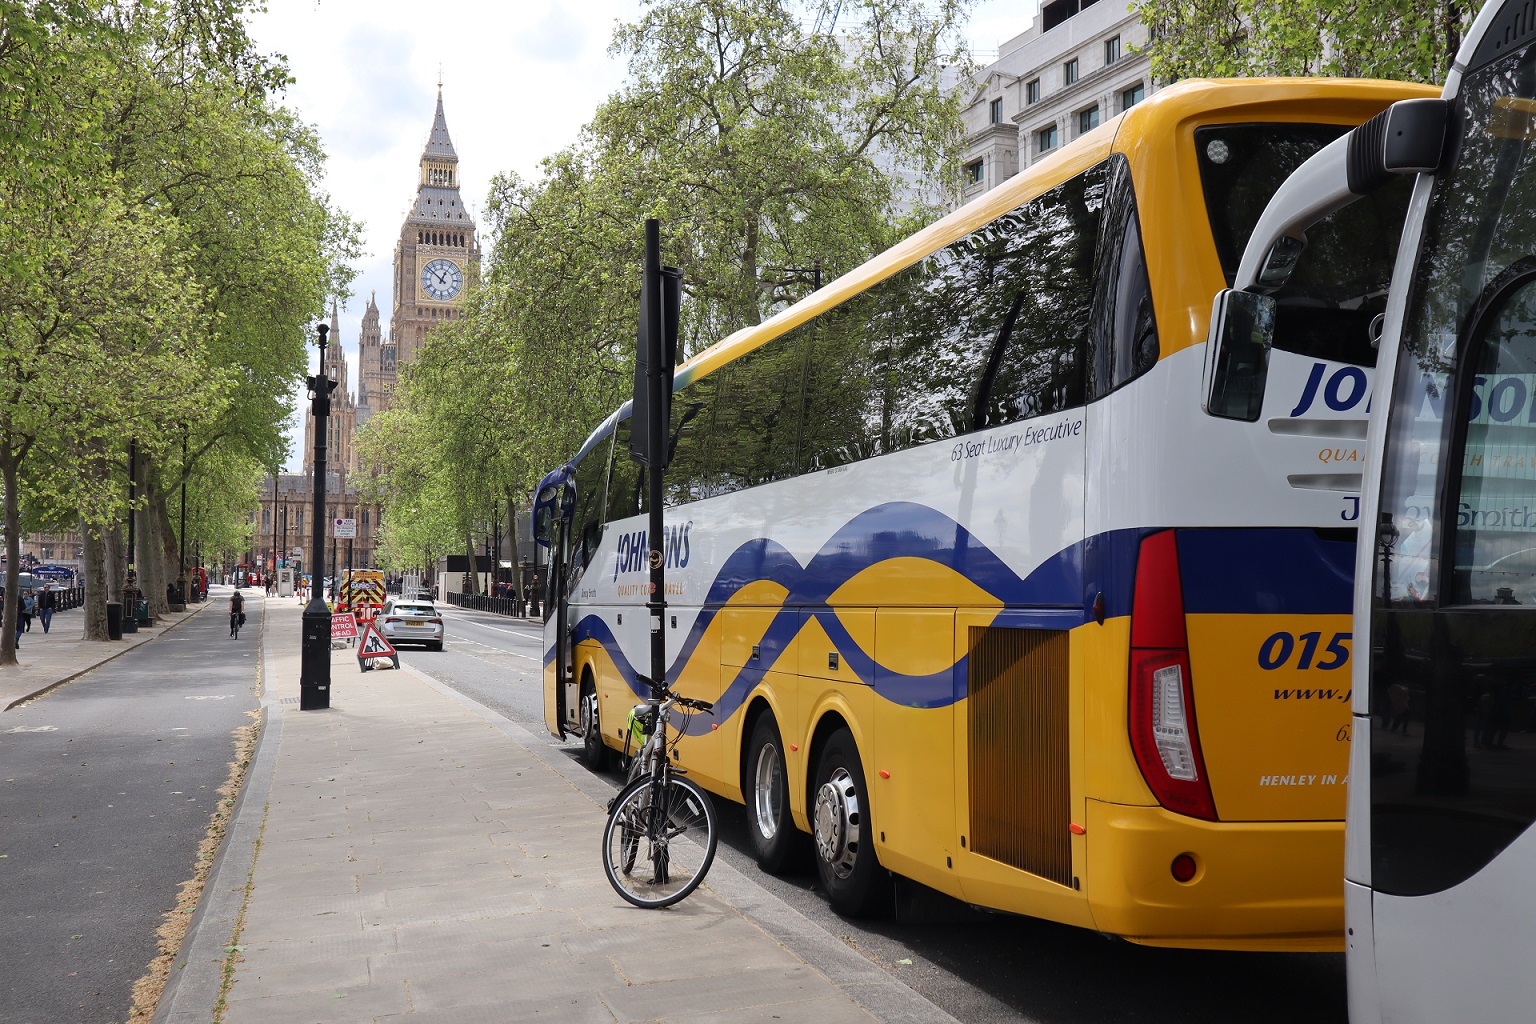 Coach industry takes its lobbying to Parliament